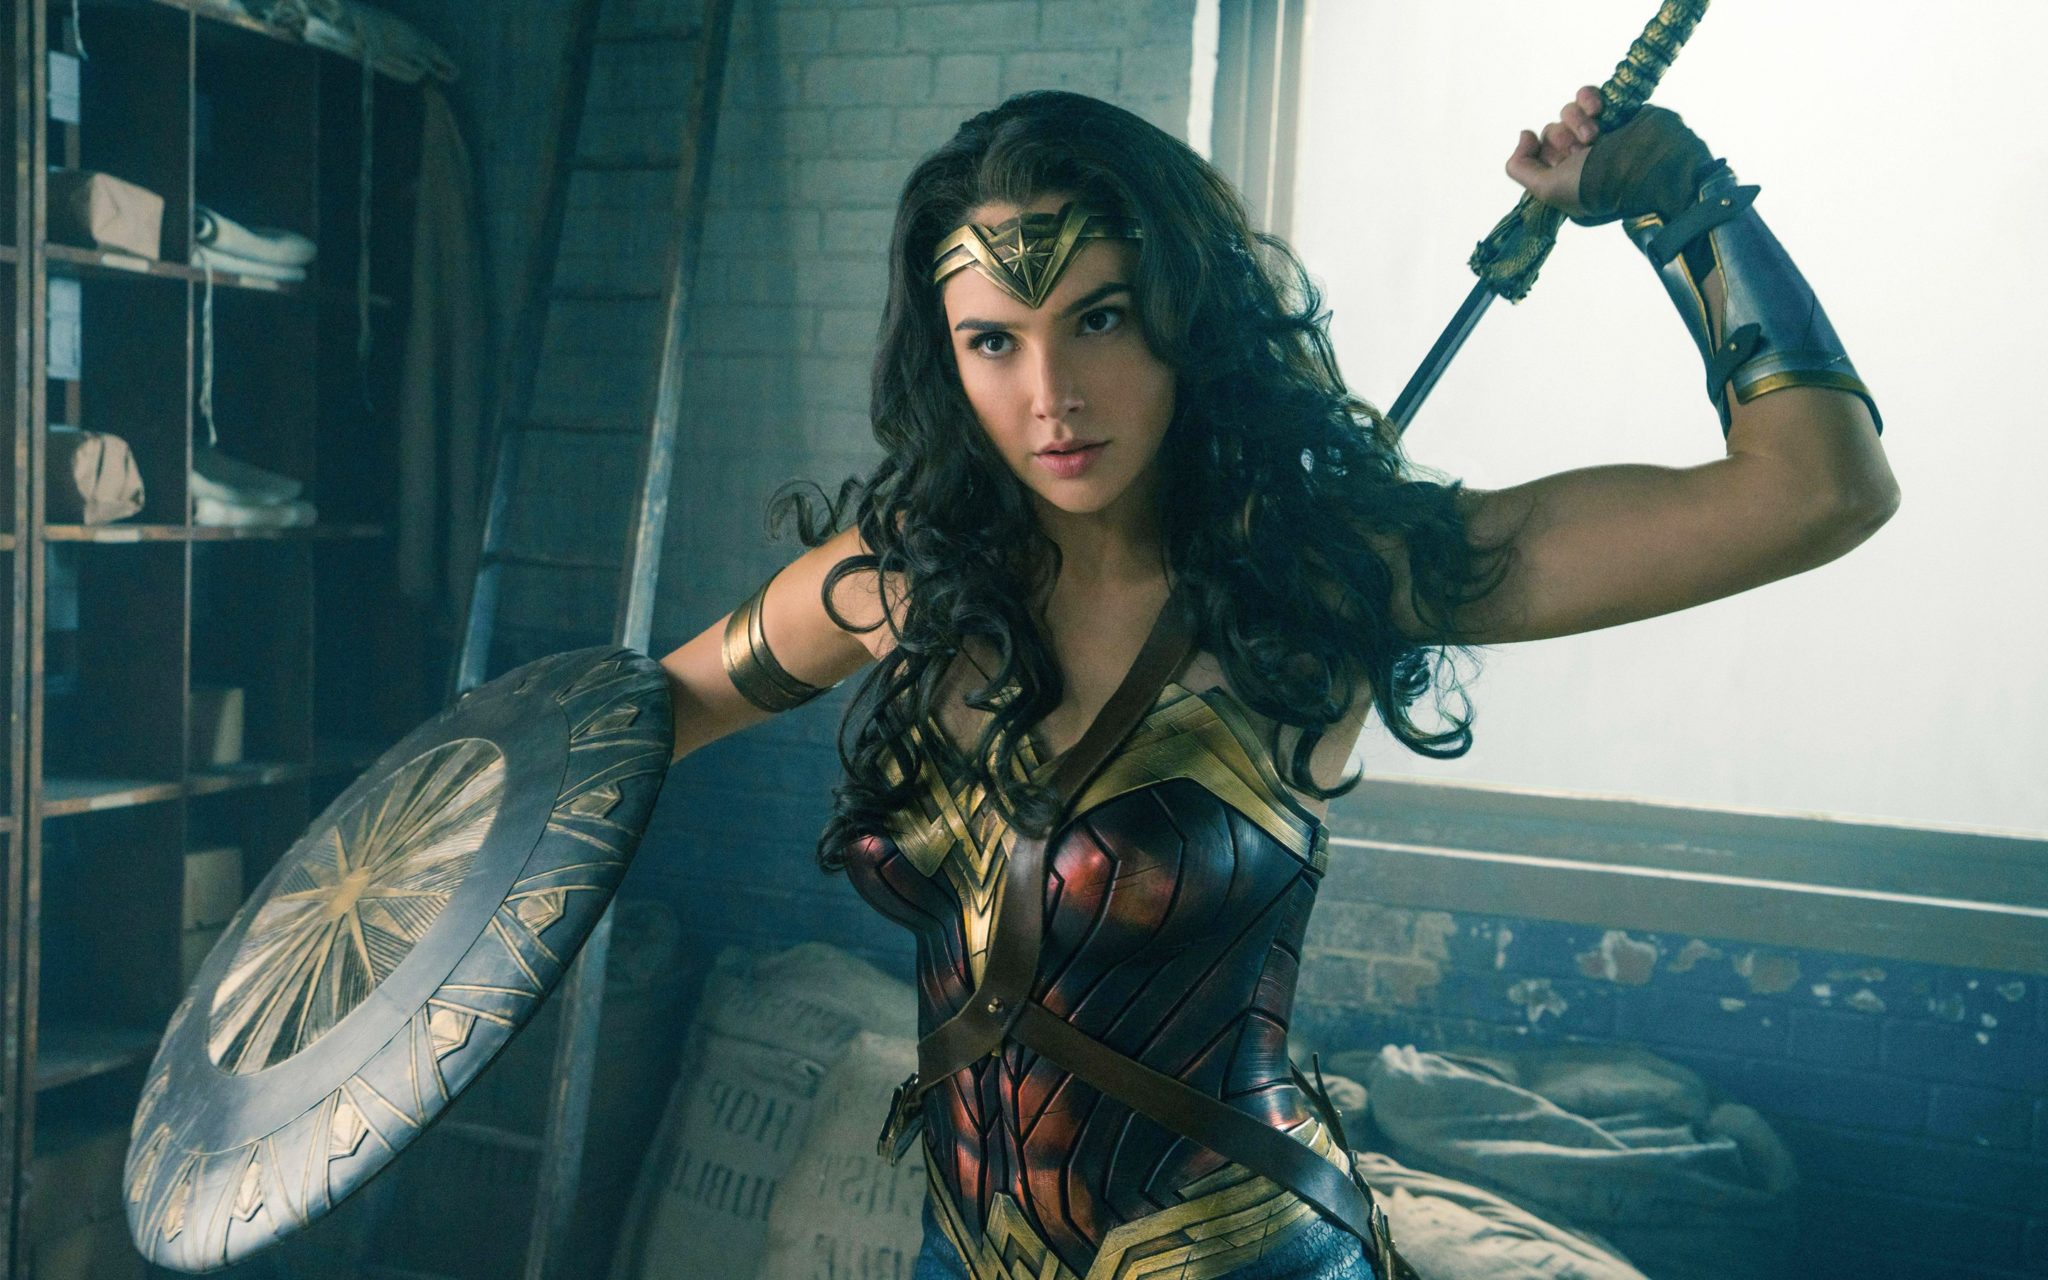 Hollywood's ideas about audiences are outdated. Wonder Woman's record